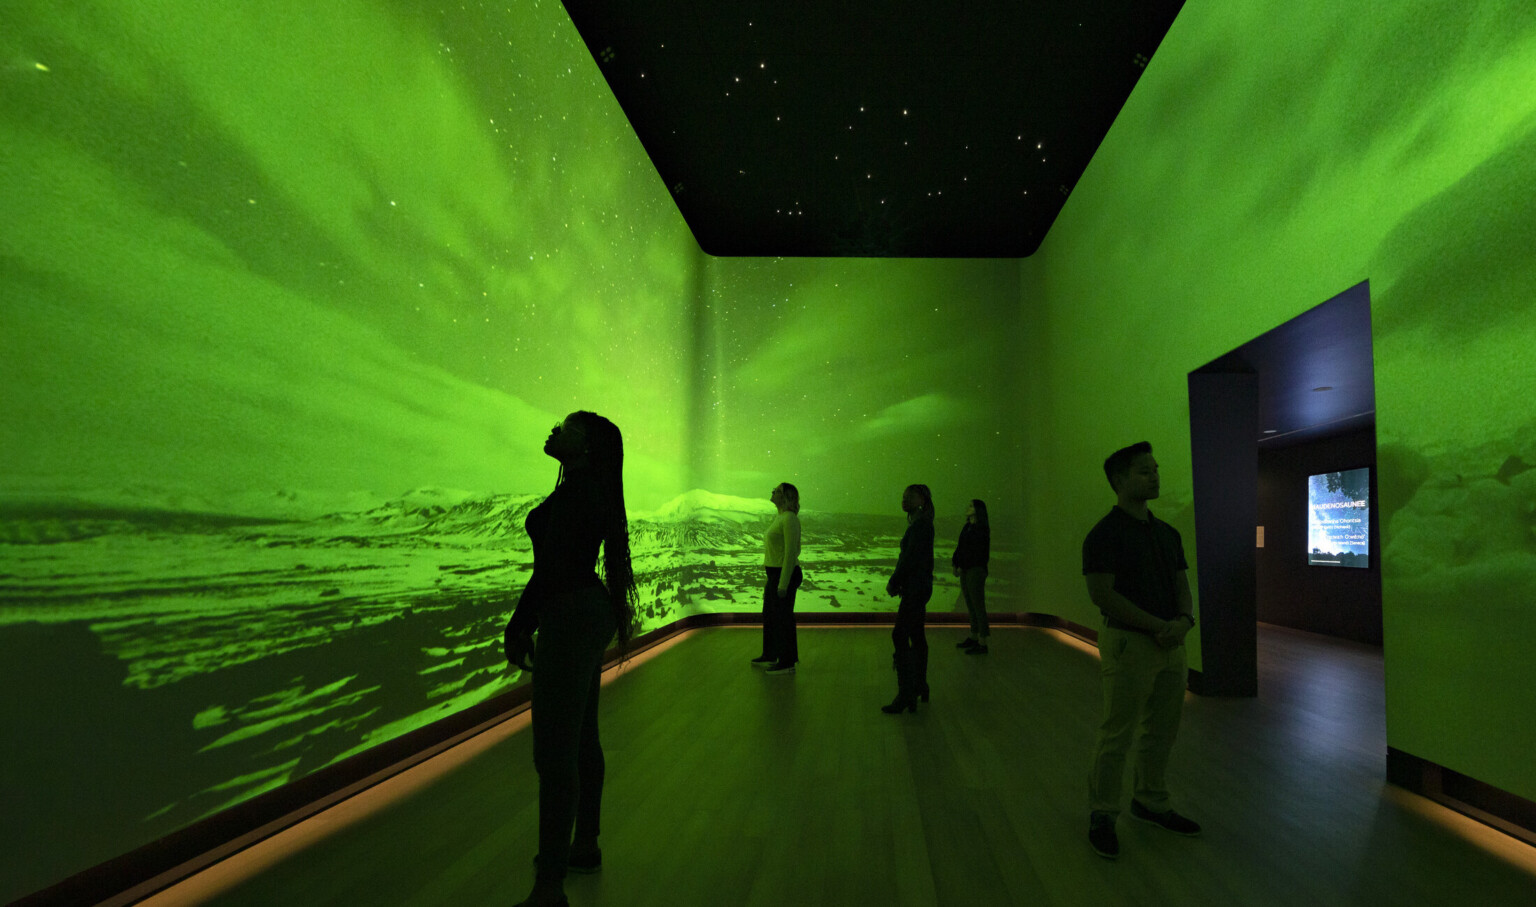 An immersive art exhibit at the Heard Museum with screens on all visible walls of the room showing the Northern Lights among snow-capped hills colorized with bright green